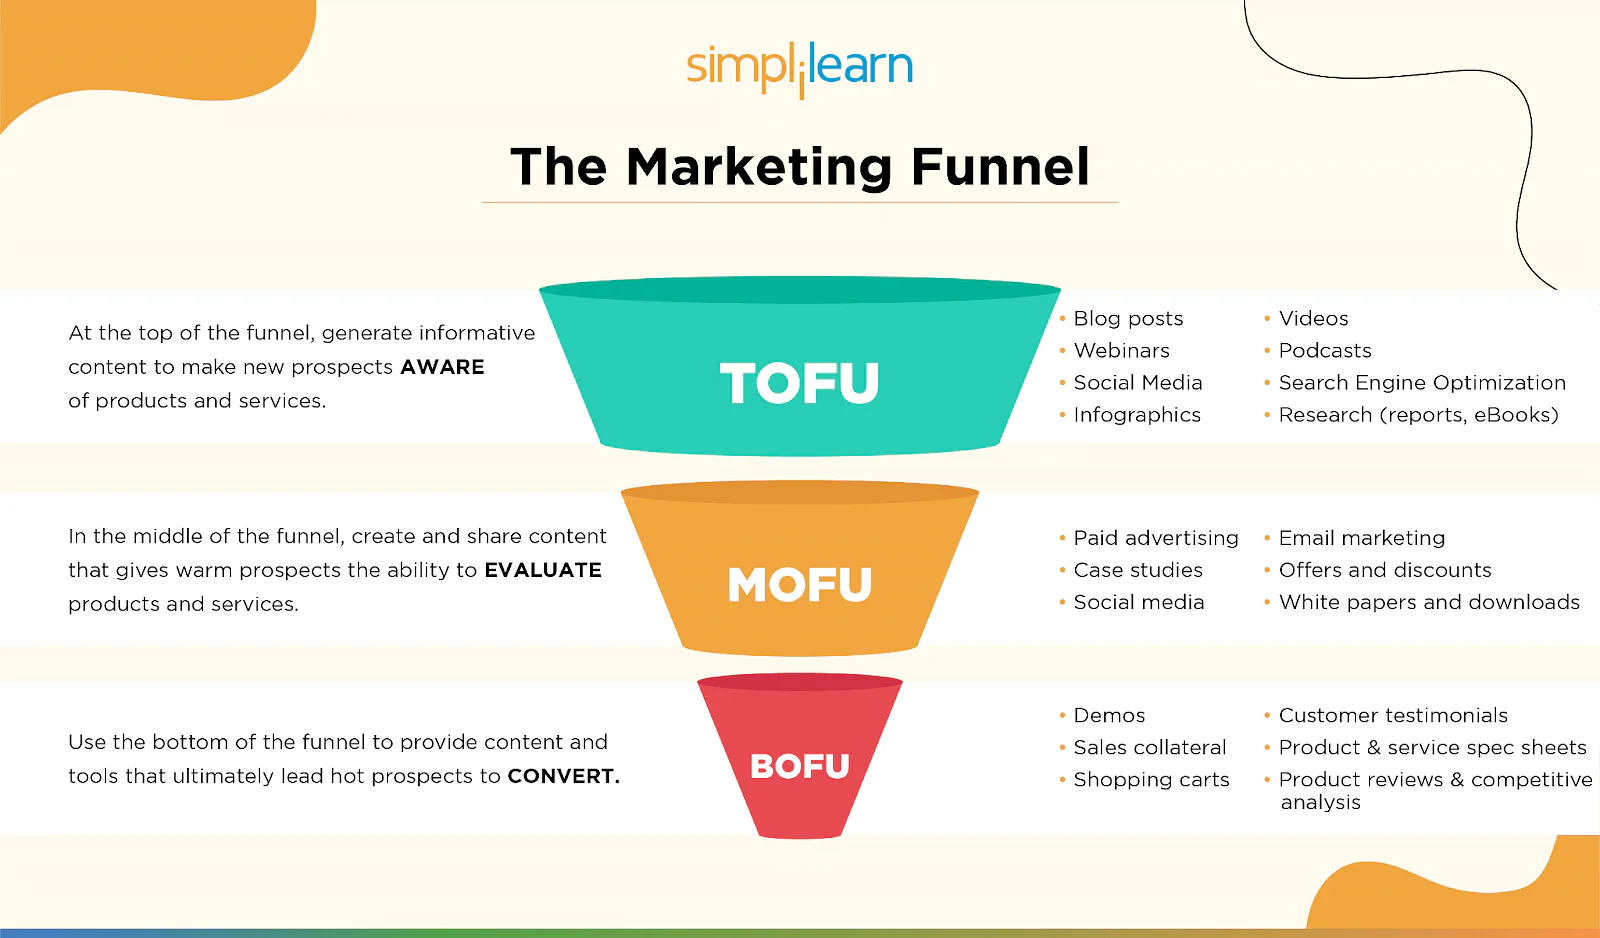 An infographic showing the different stages of the marketing funnel which are; top of the funnel, middle of the funnel, and bottom of the funnel.